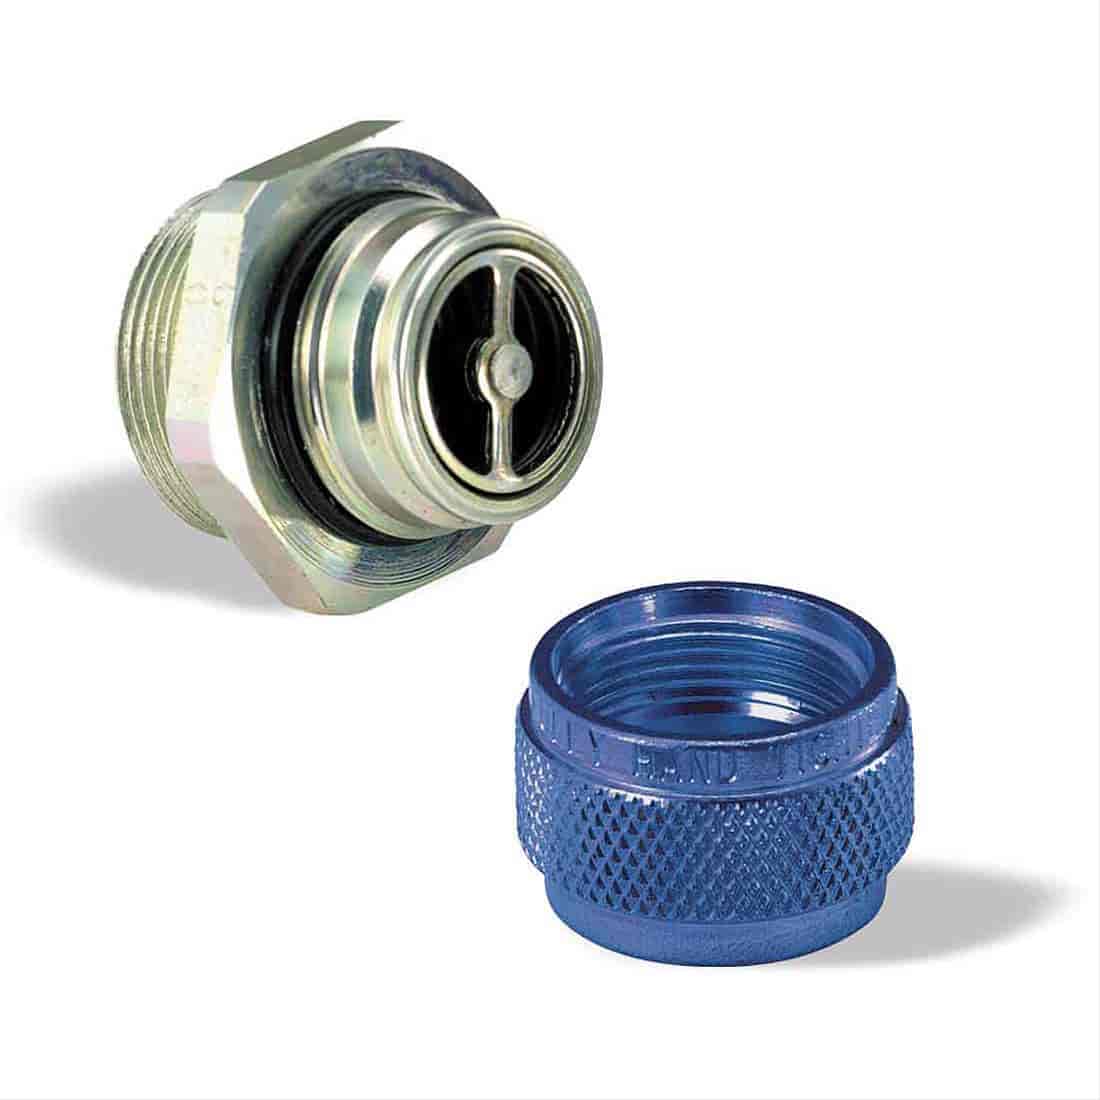 Male Half 7/8 -14 UNF -2A Thread Size 1.54in.x.96in. 1-1/4in. Hex Size - Quick-Drain Oil Pan Coupling